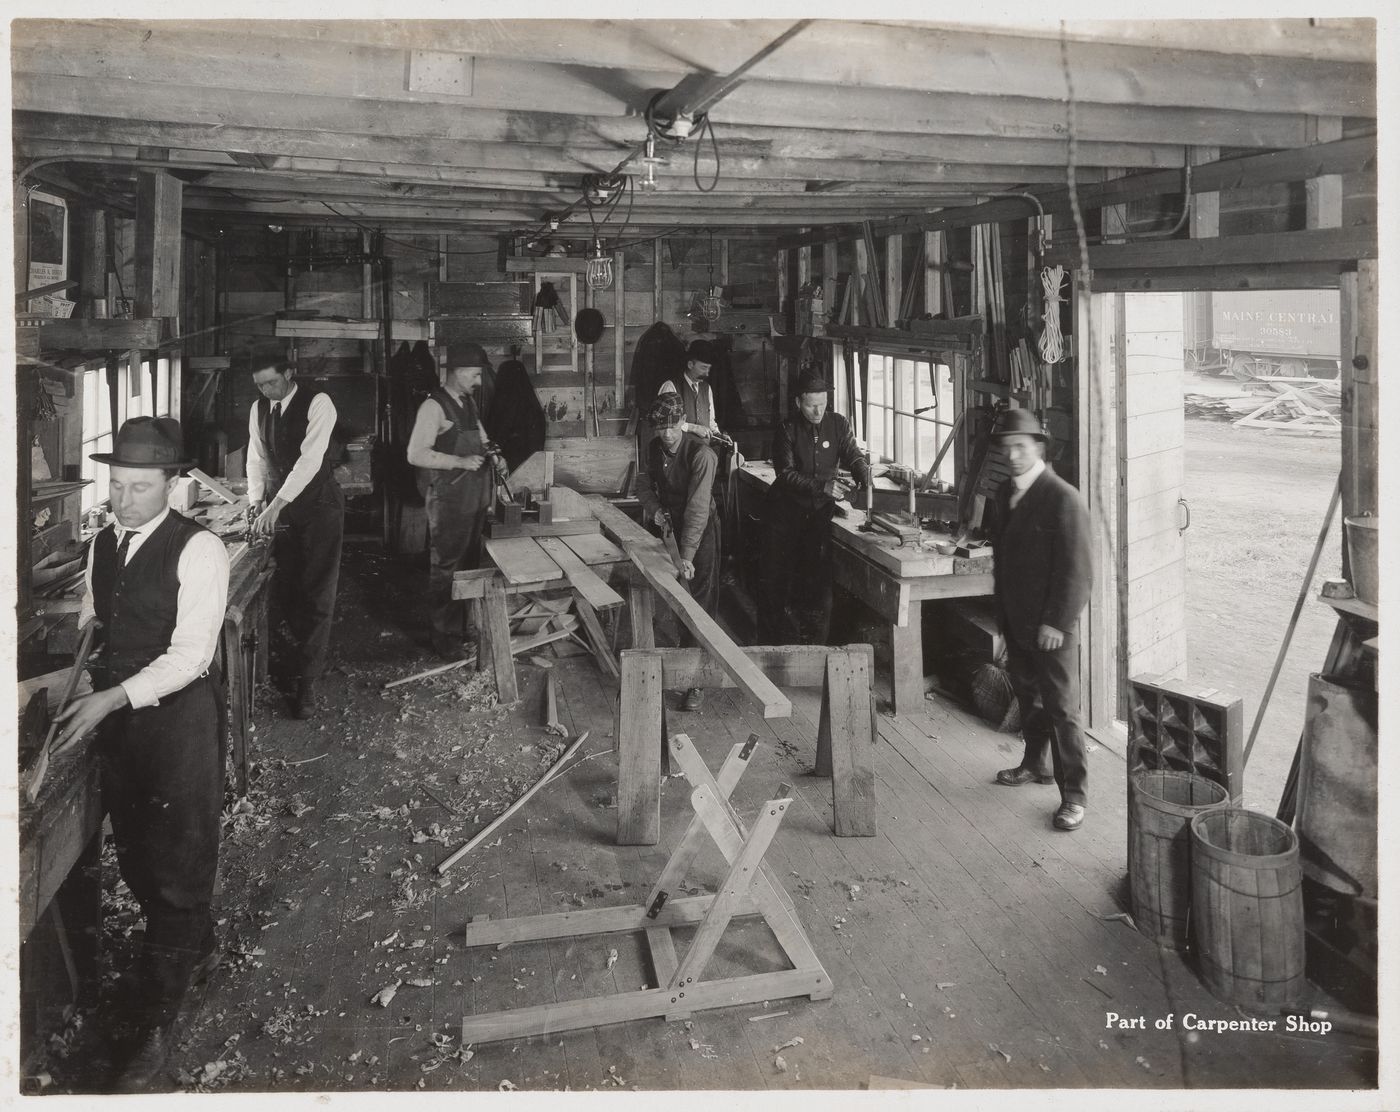 Interior view of carpenter shop at the Energite Explosives Plant No. 3, the Shell Loading Plant, Renfrew, Ontario, Canada